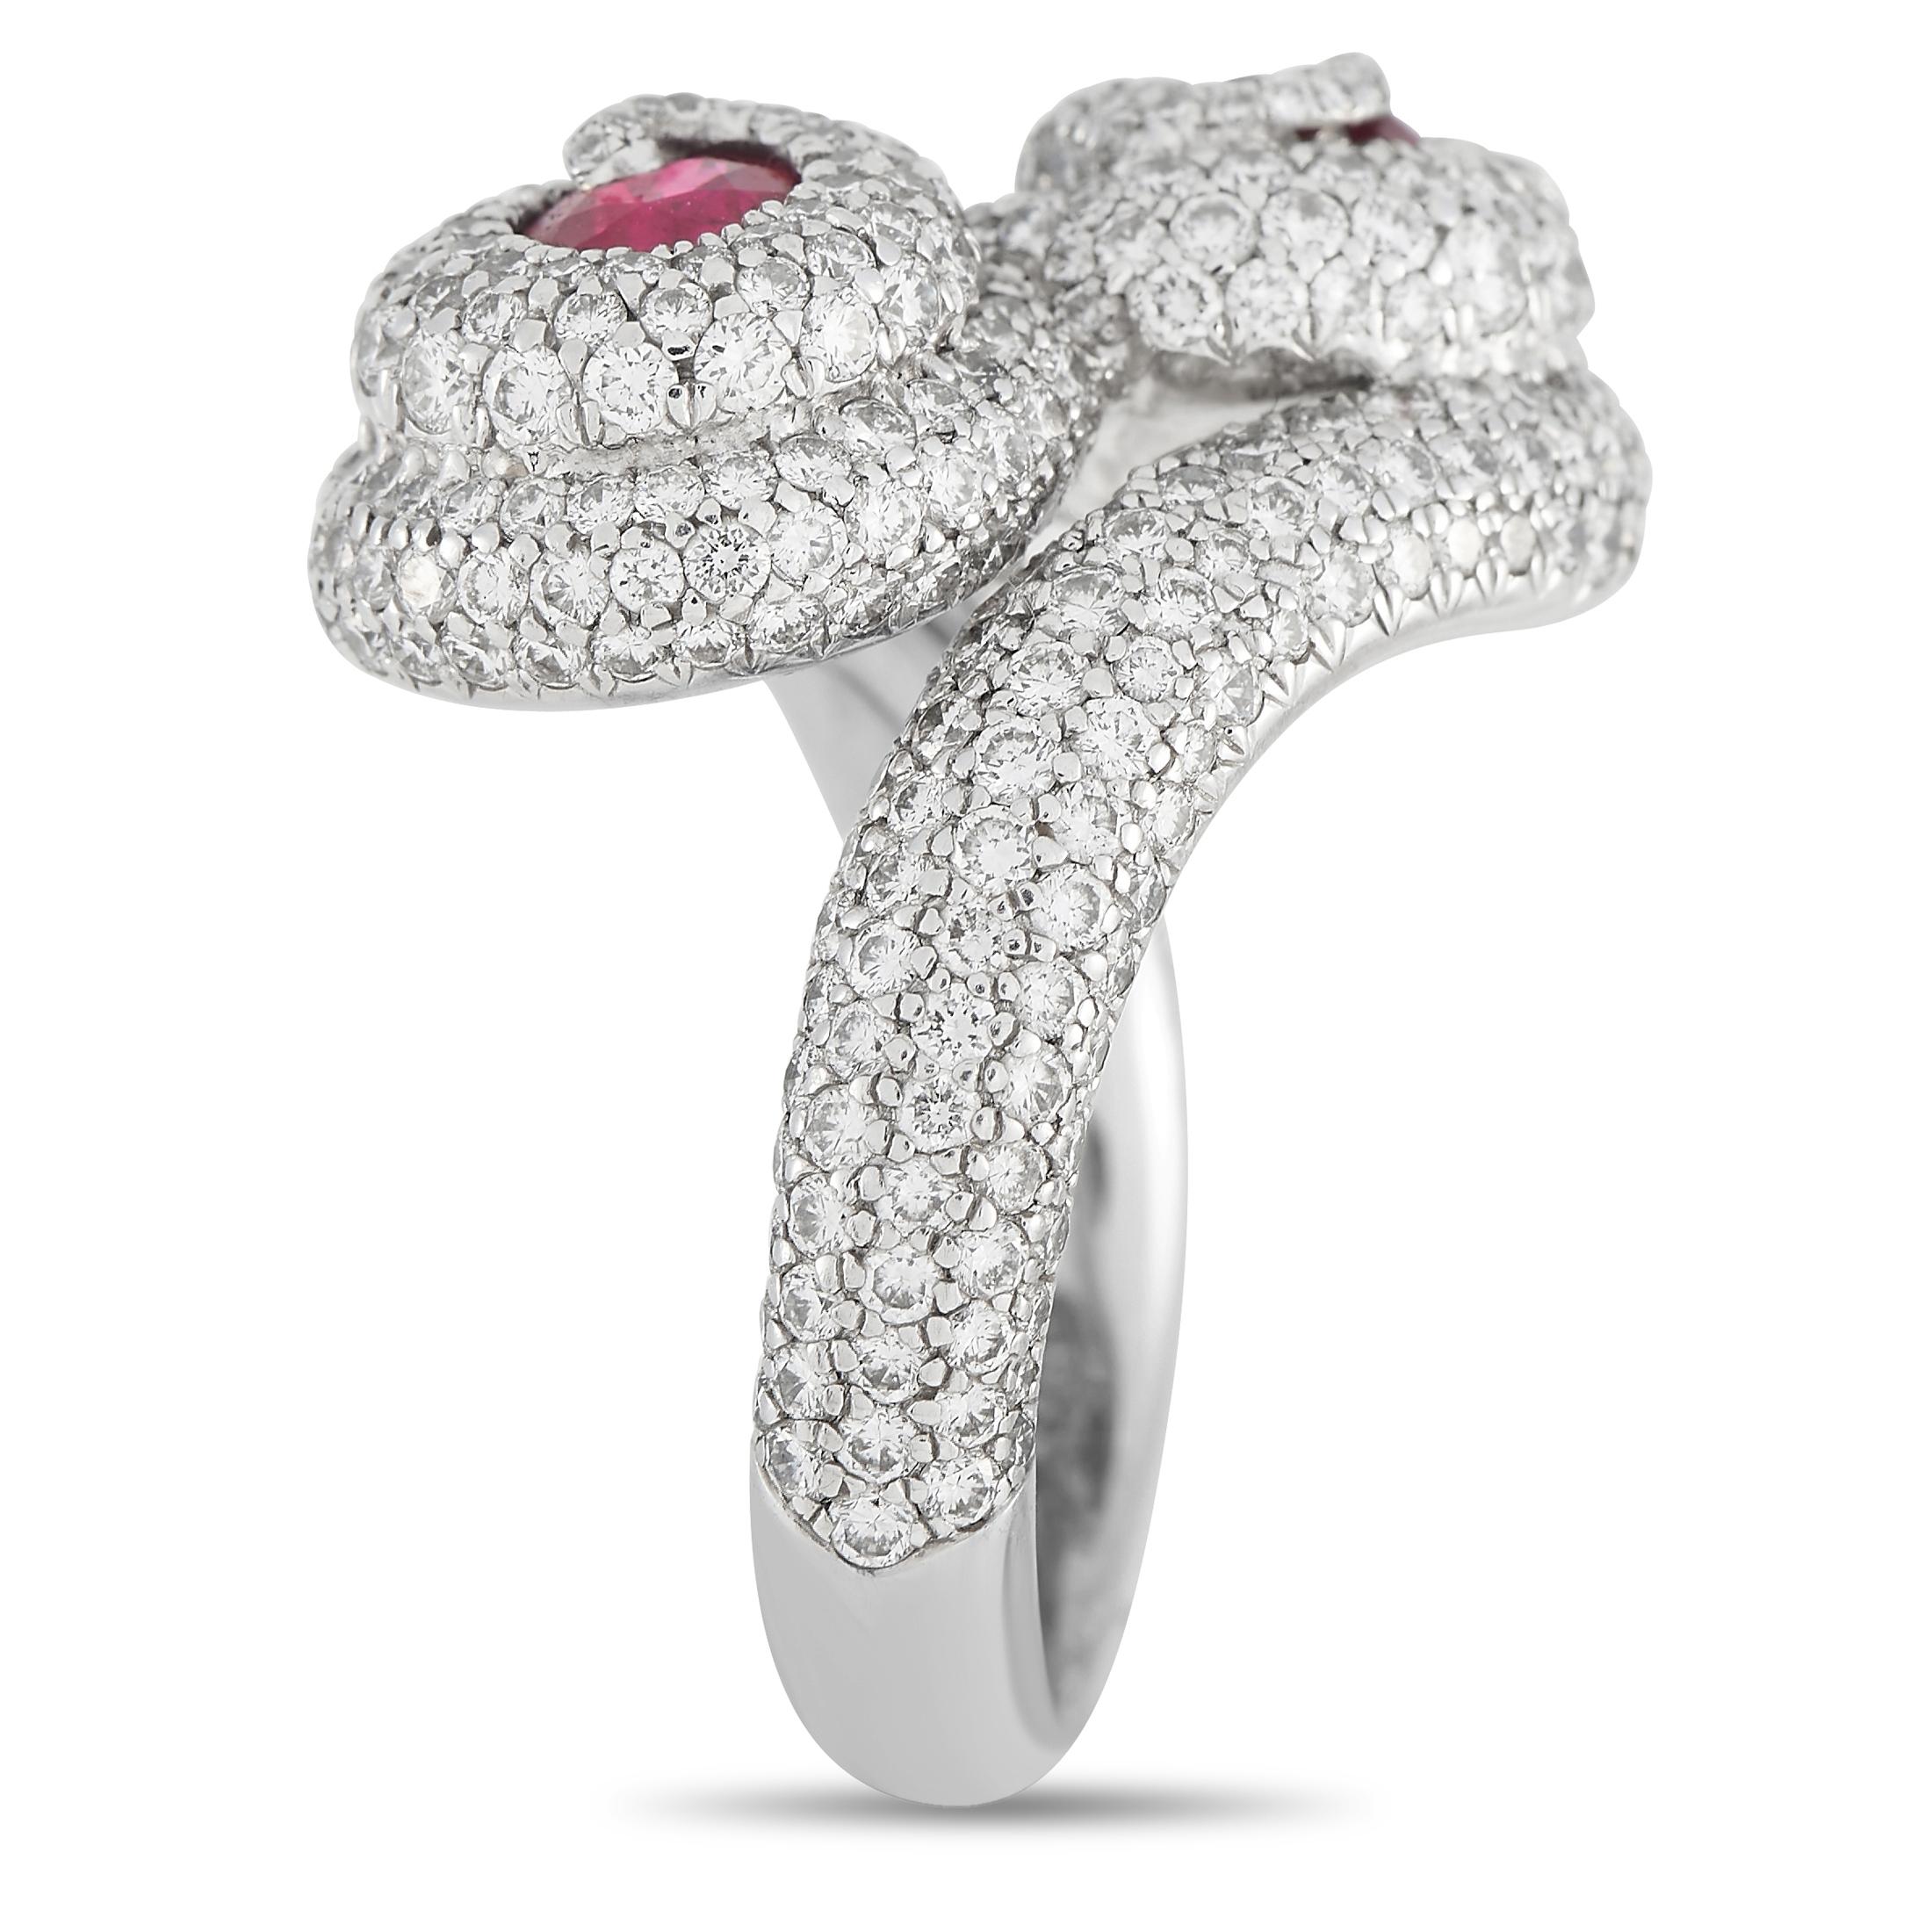 This De Grisogono ring will continually catch the light. Diamonds totaling 3.51 carats sparkle and shine from their place within the 18K White Gold setting, which features a 3mm wide band and an 8mm top height. A pair of rubies totaling 1.26 carats